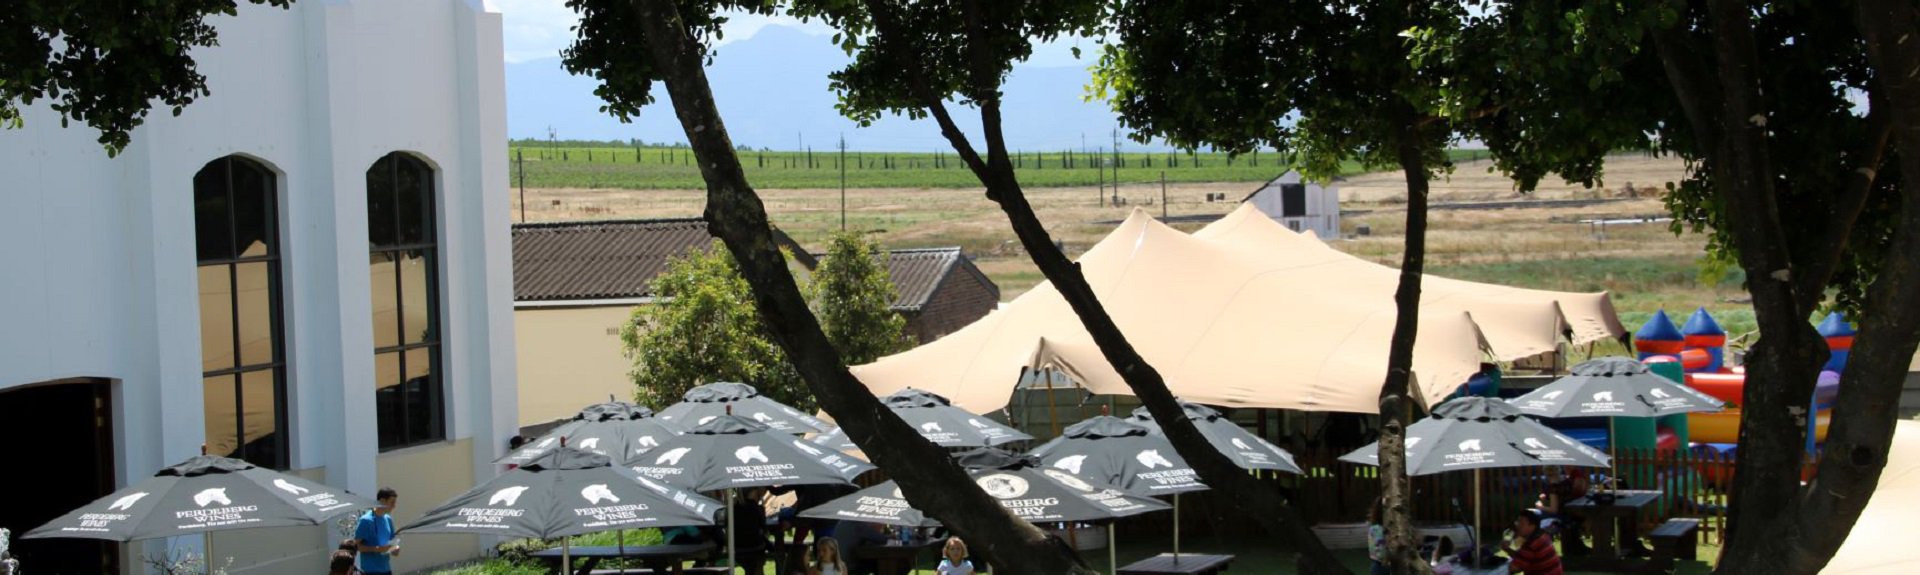 Perdeberg. Winery | Cape Town | Paarl | Things to do With Kids